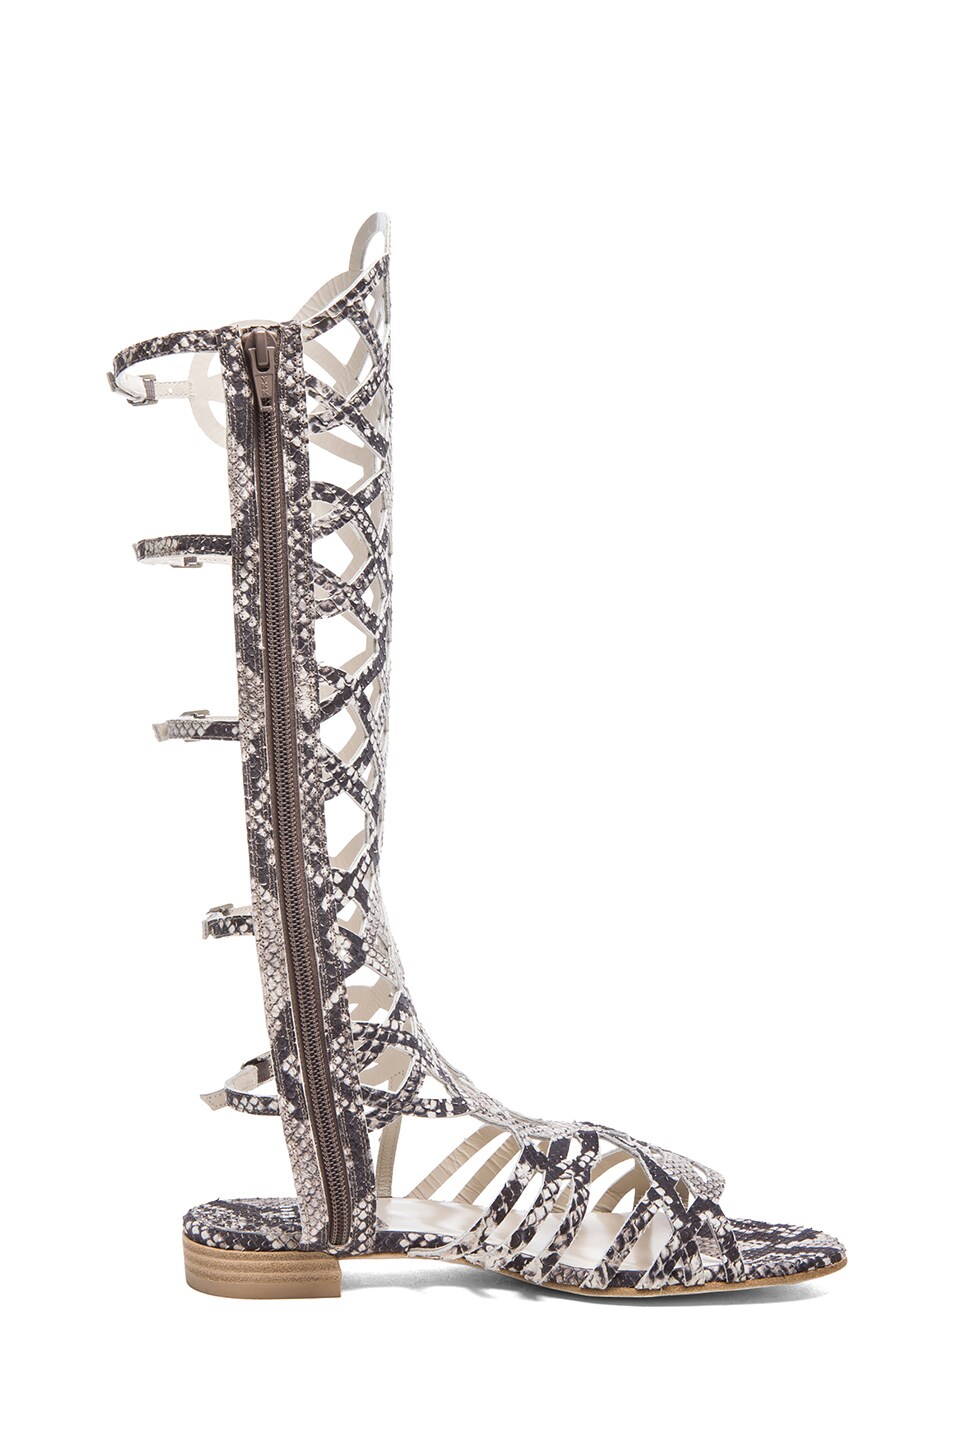 Stuart Weitzman Aphrodite Embossed Leather Sandals in Natural Snake | FWRD